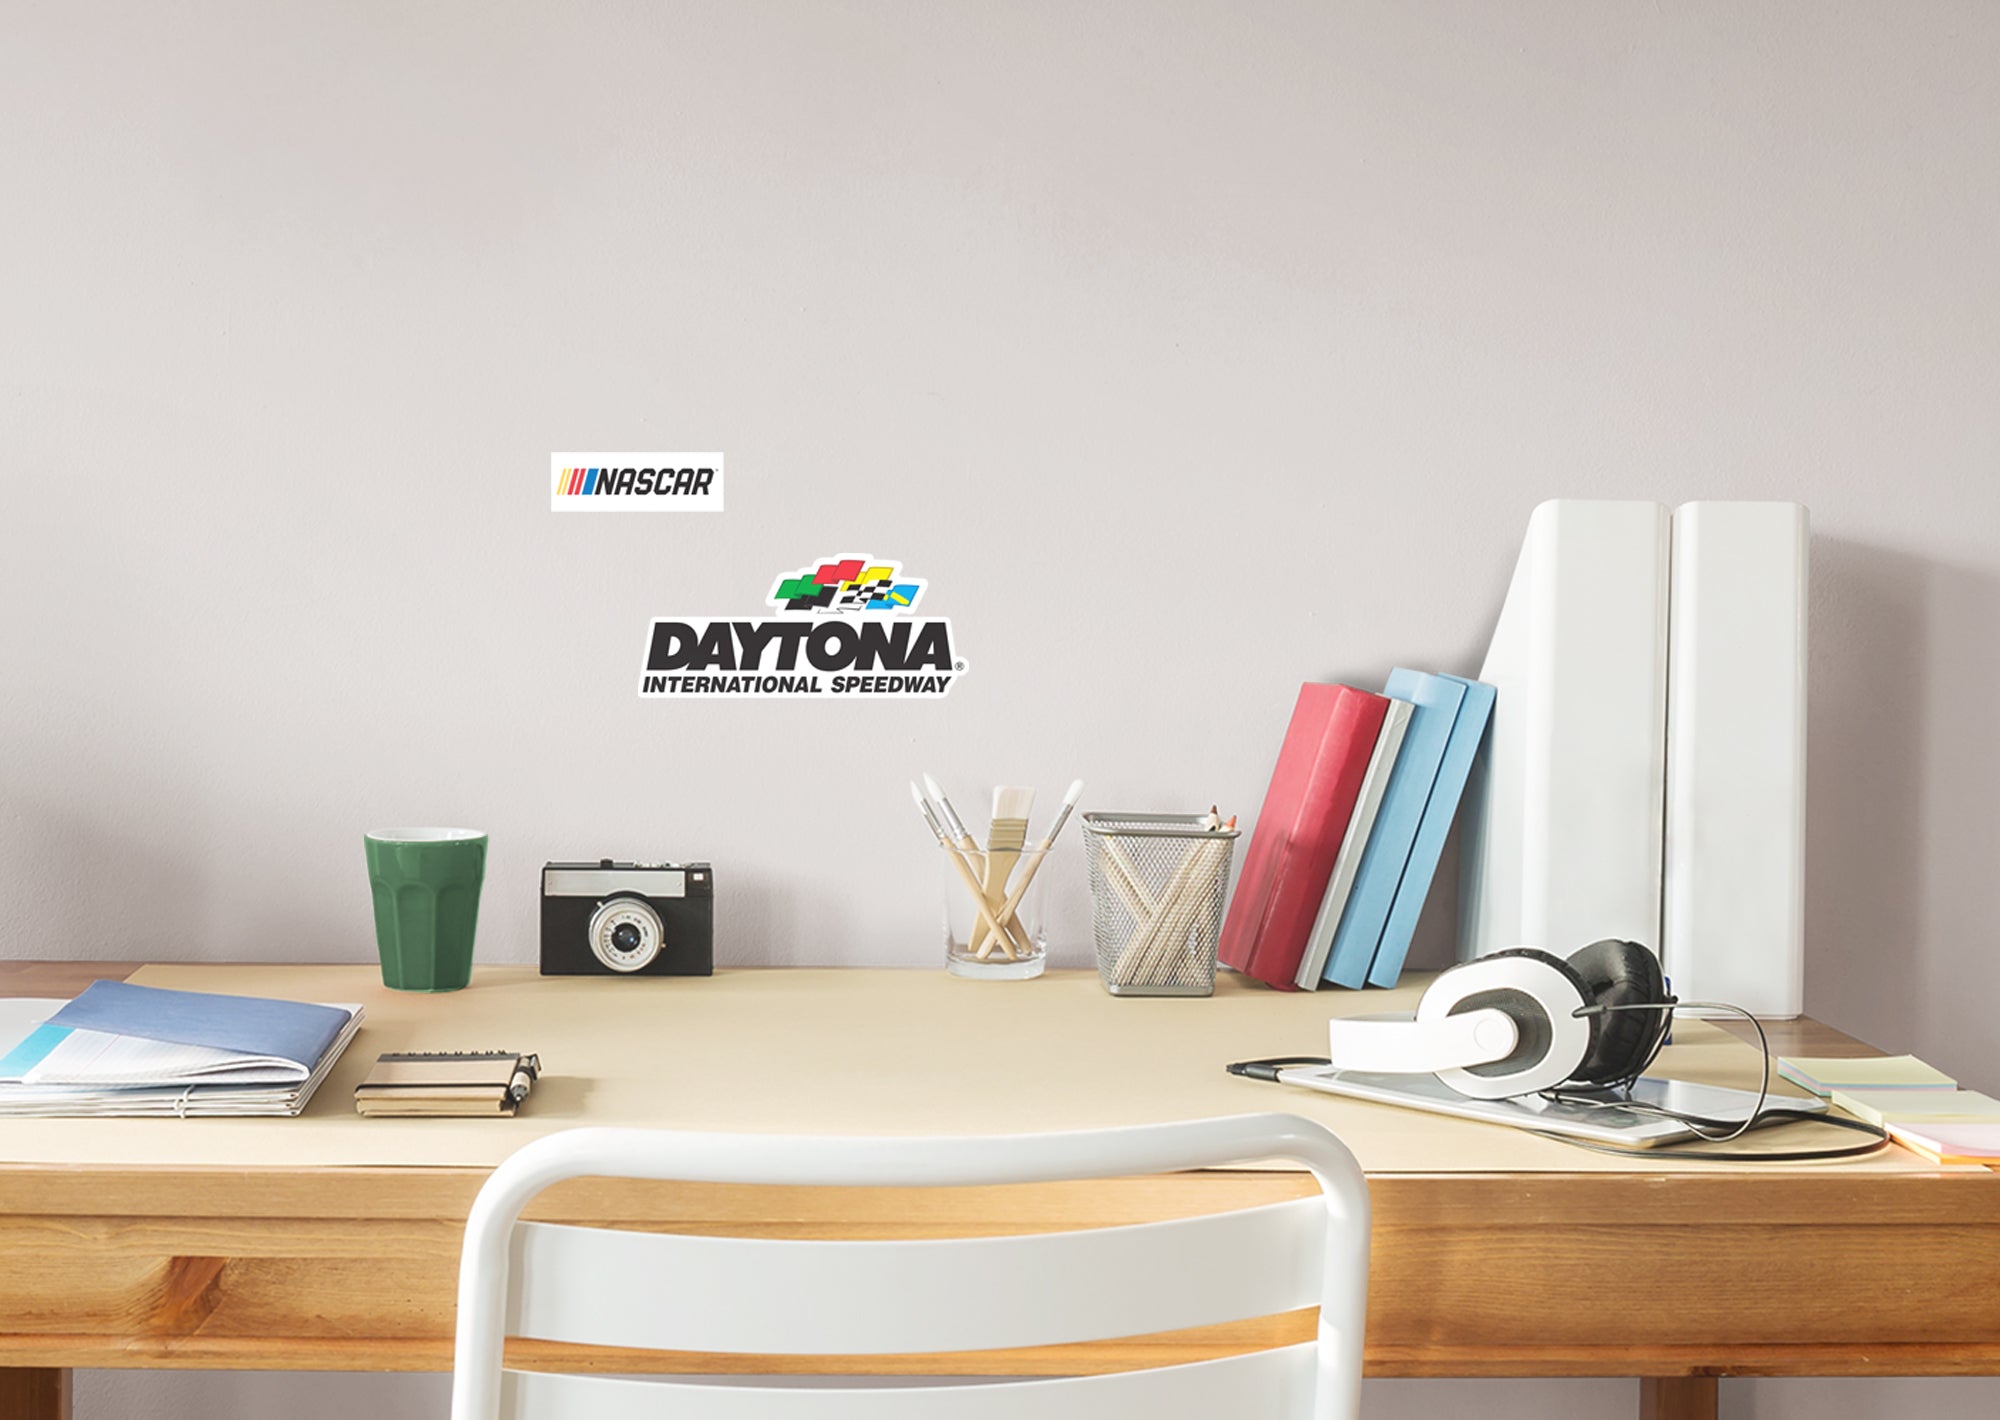 Daytona International Speedway 2021 Logo - Officially Licensed NASCAR Removable Wall Decal Large by Fathead | Vinyl